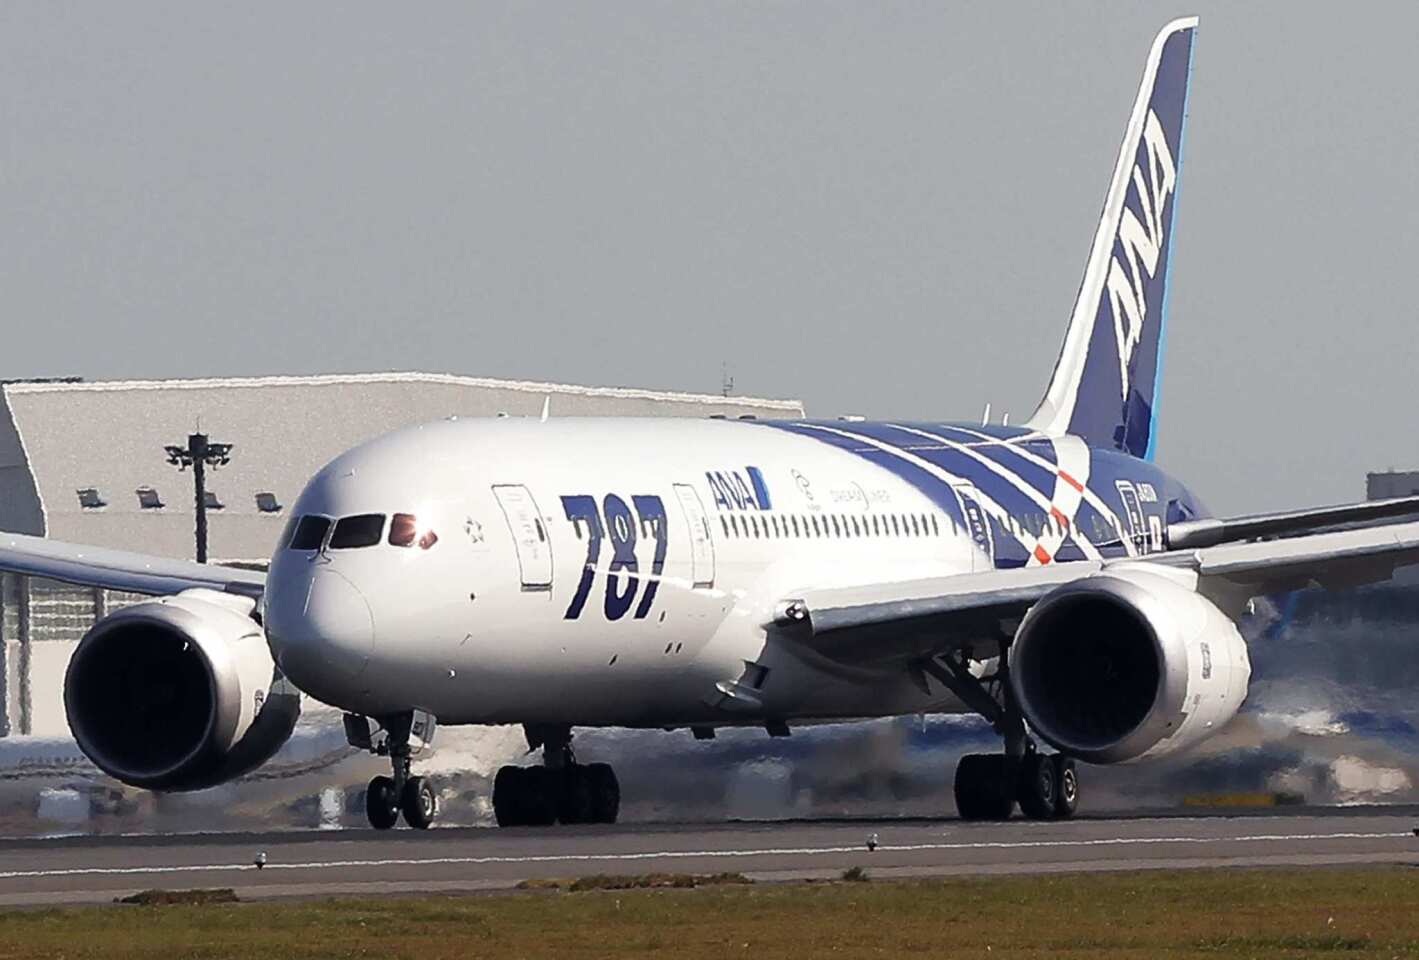 All Nippon Airways' first Dreamliner sits 264 passengers: 252 in economy class and 12 in business. Later versions of the plane for short-haul flights will seat 180 passengers in economy and 42 in business. Planes for long-haul flights will seat 112 passengers in economy and 46 passengers in business.